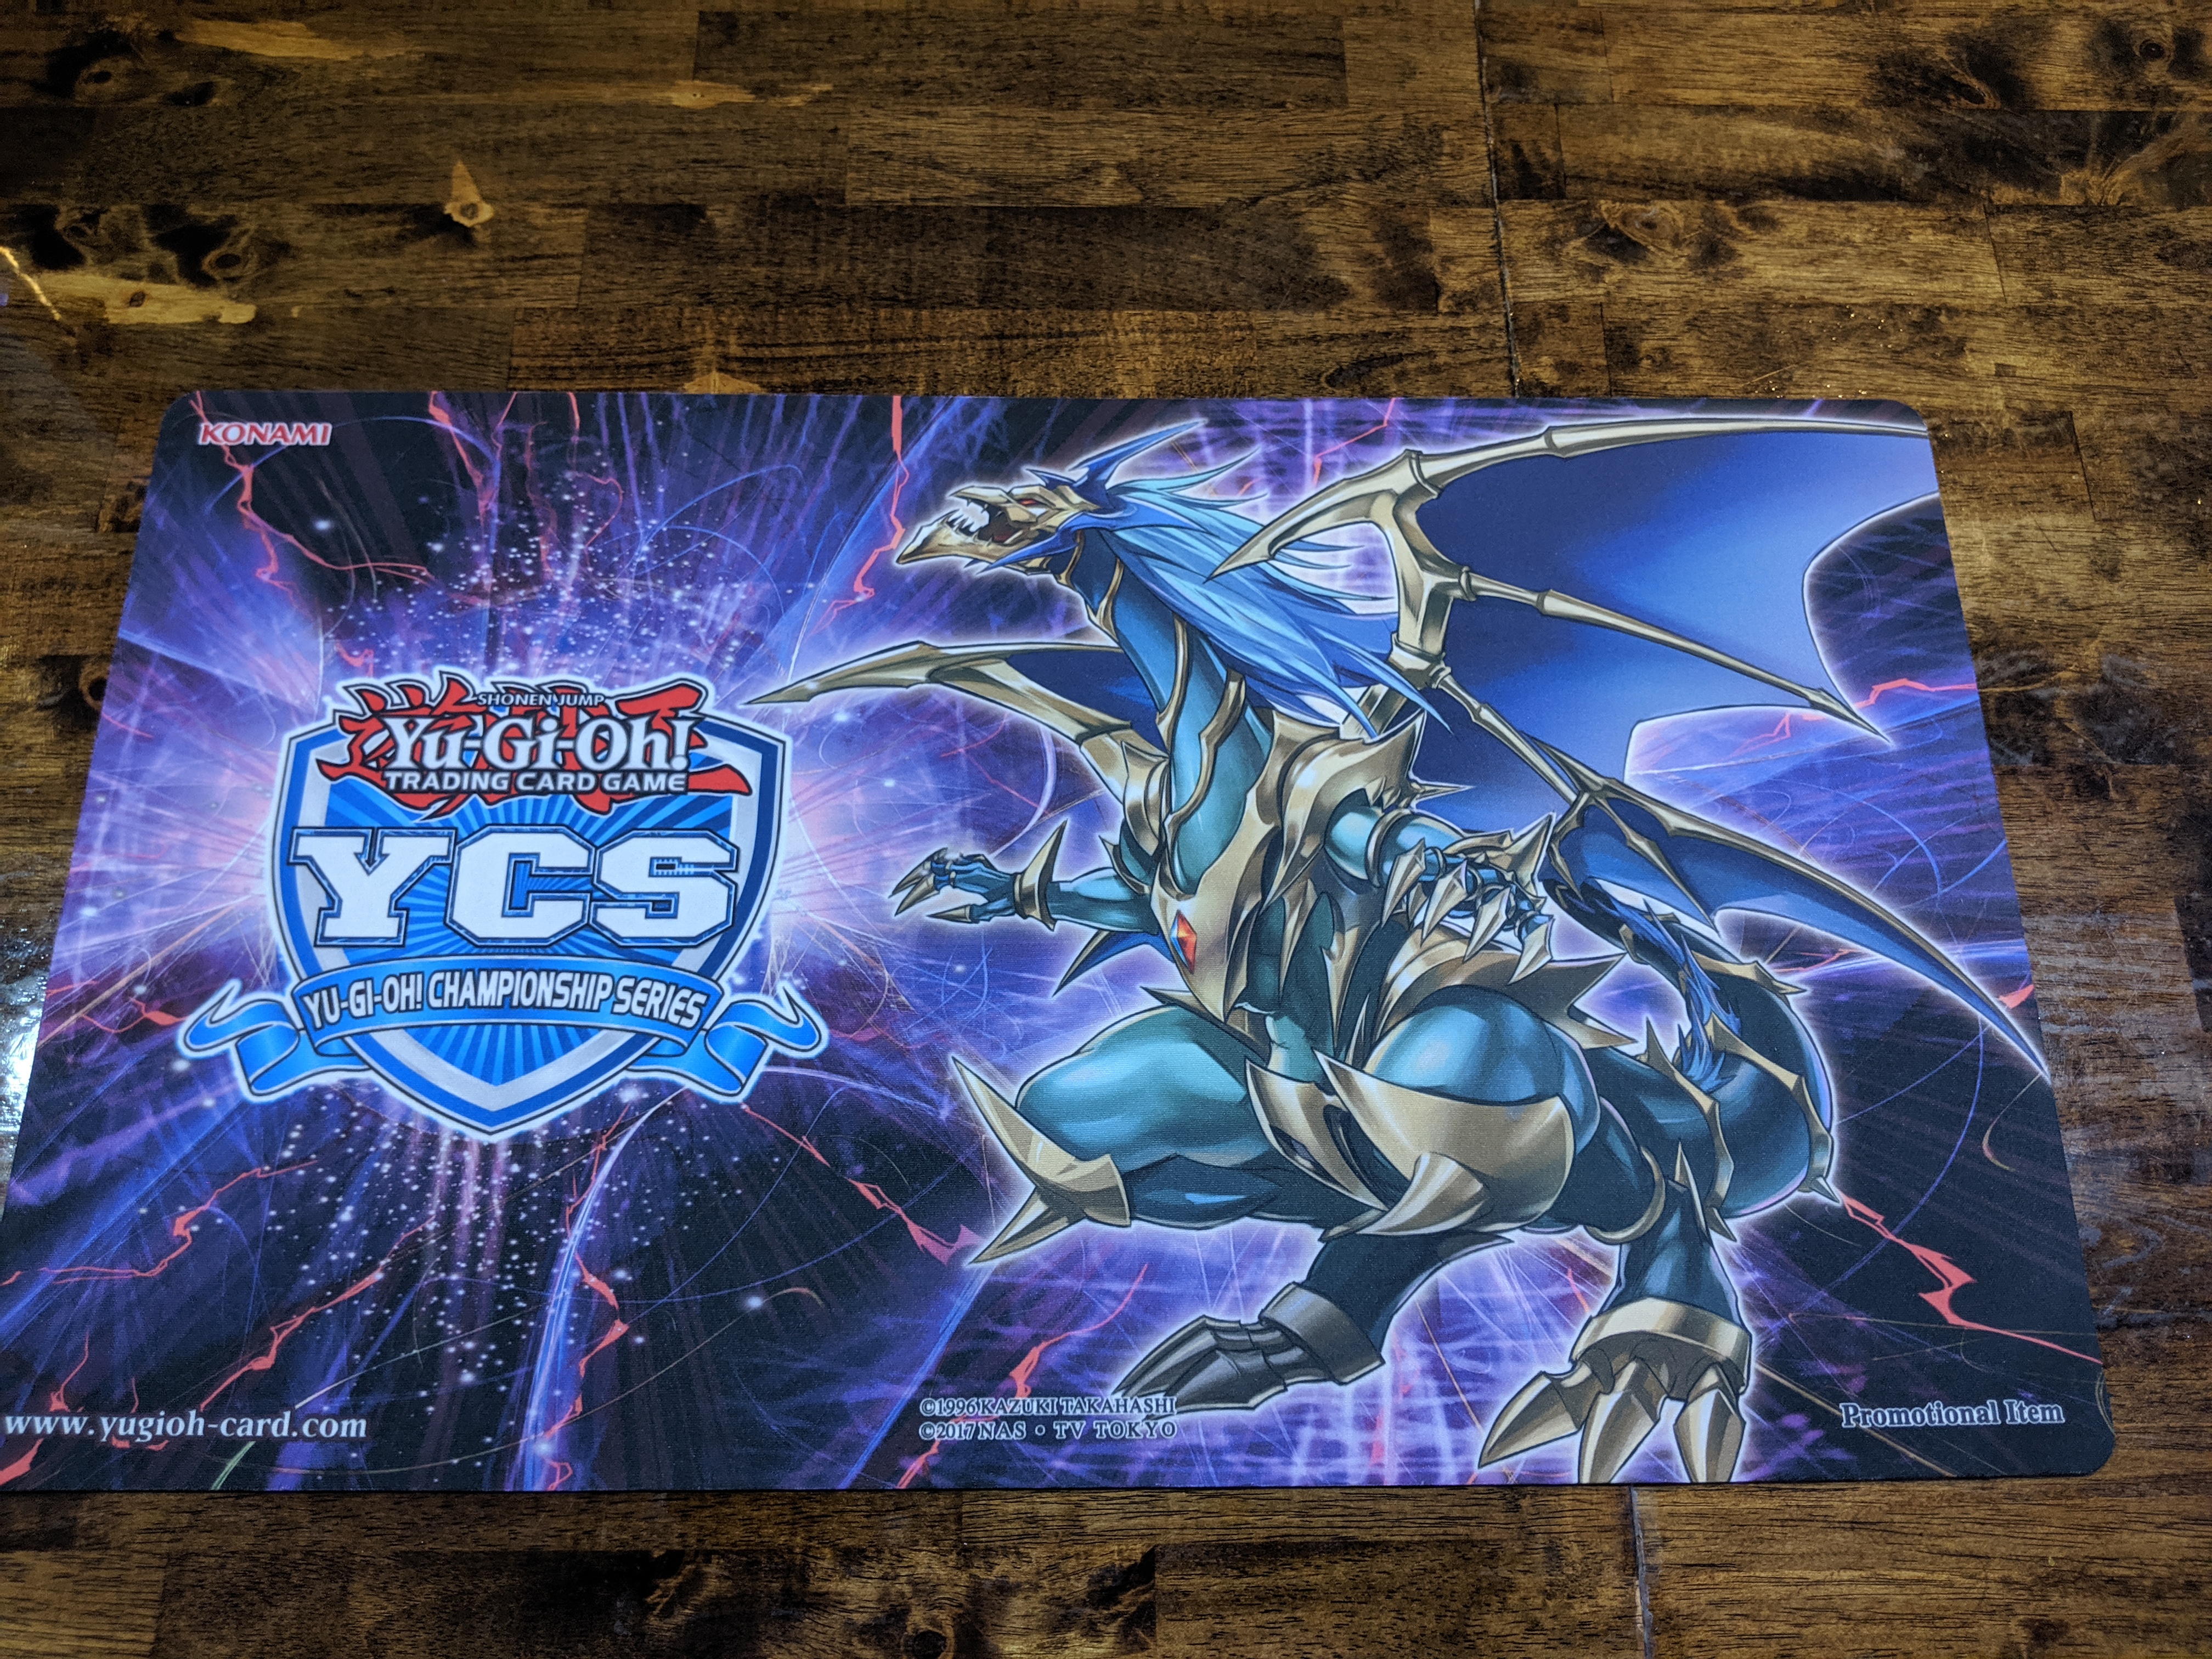 Black Luster Soldier Card Game Mat Details about   Yu-Gi-Oh TCG Playmat Chaos Emperor Dragon 